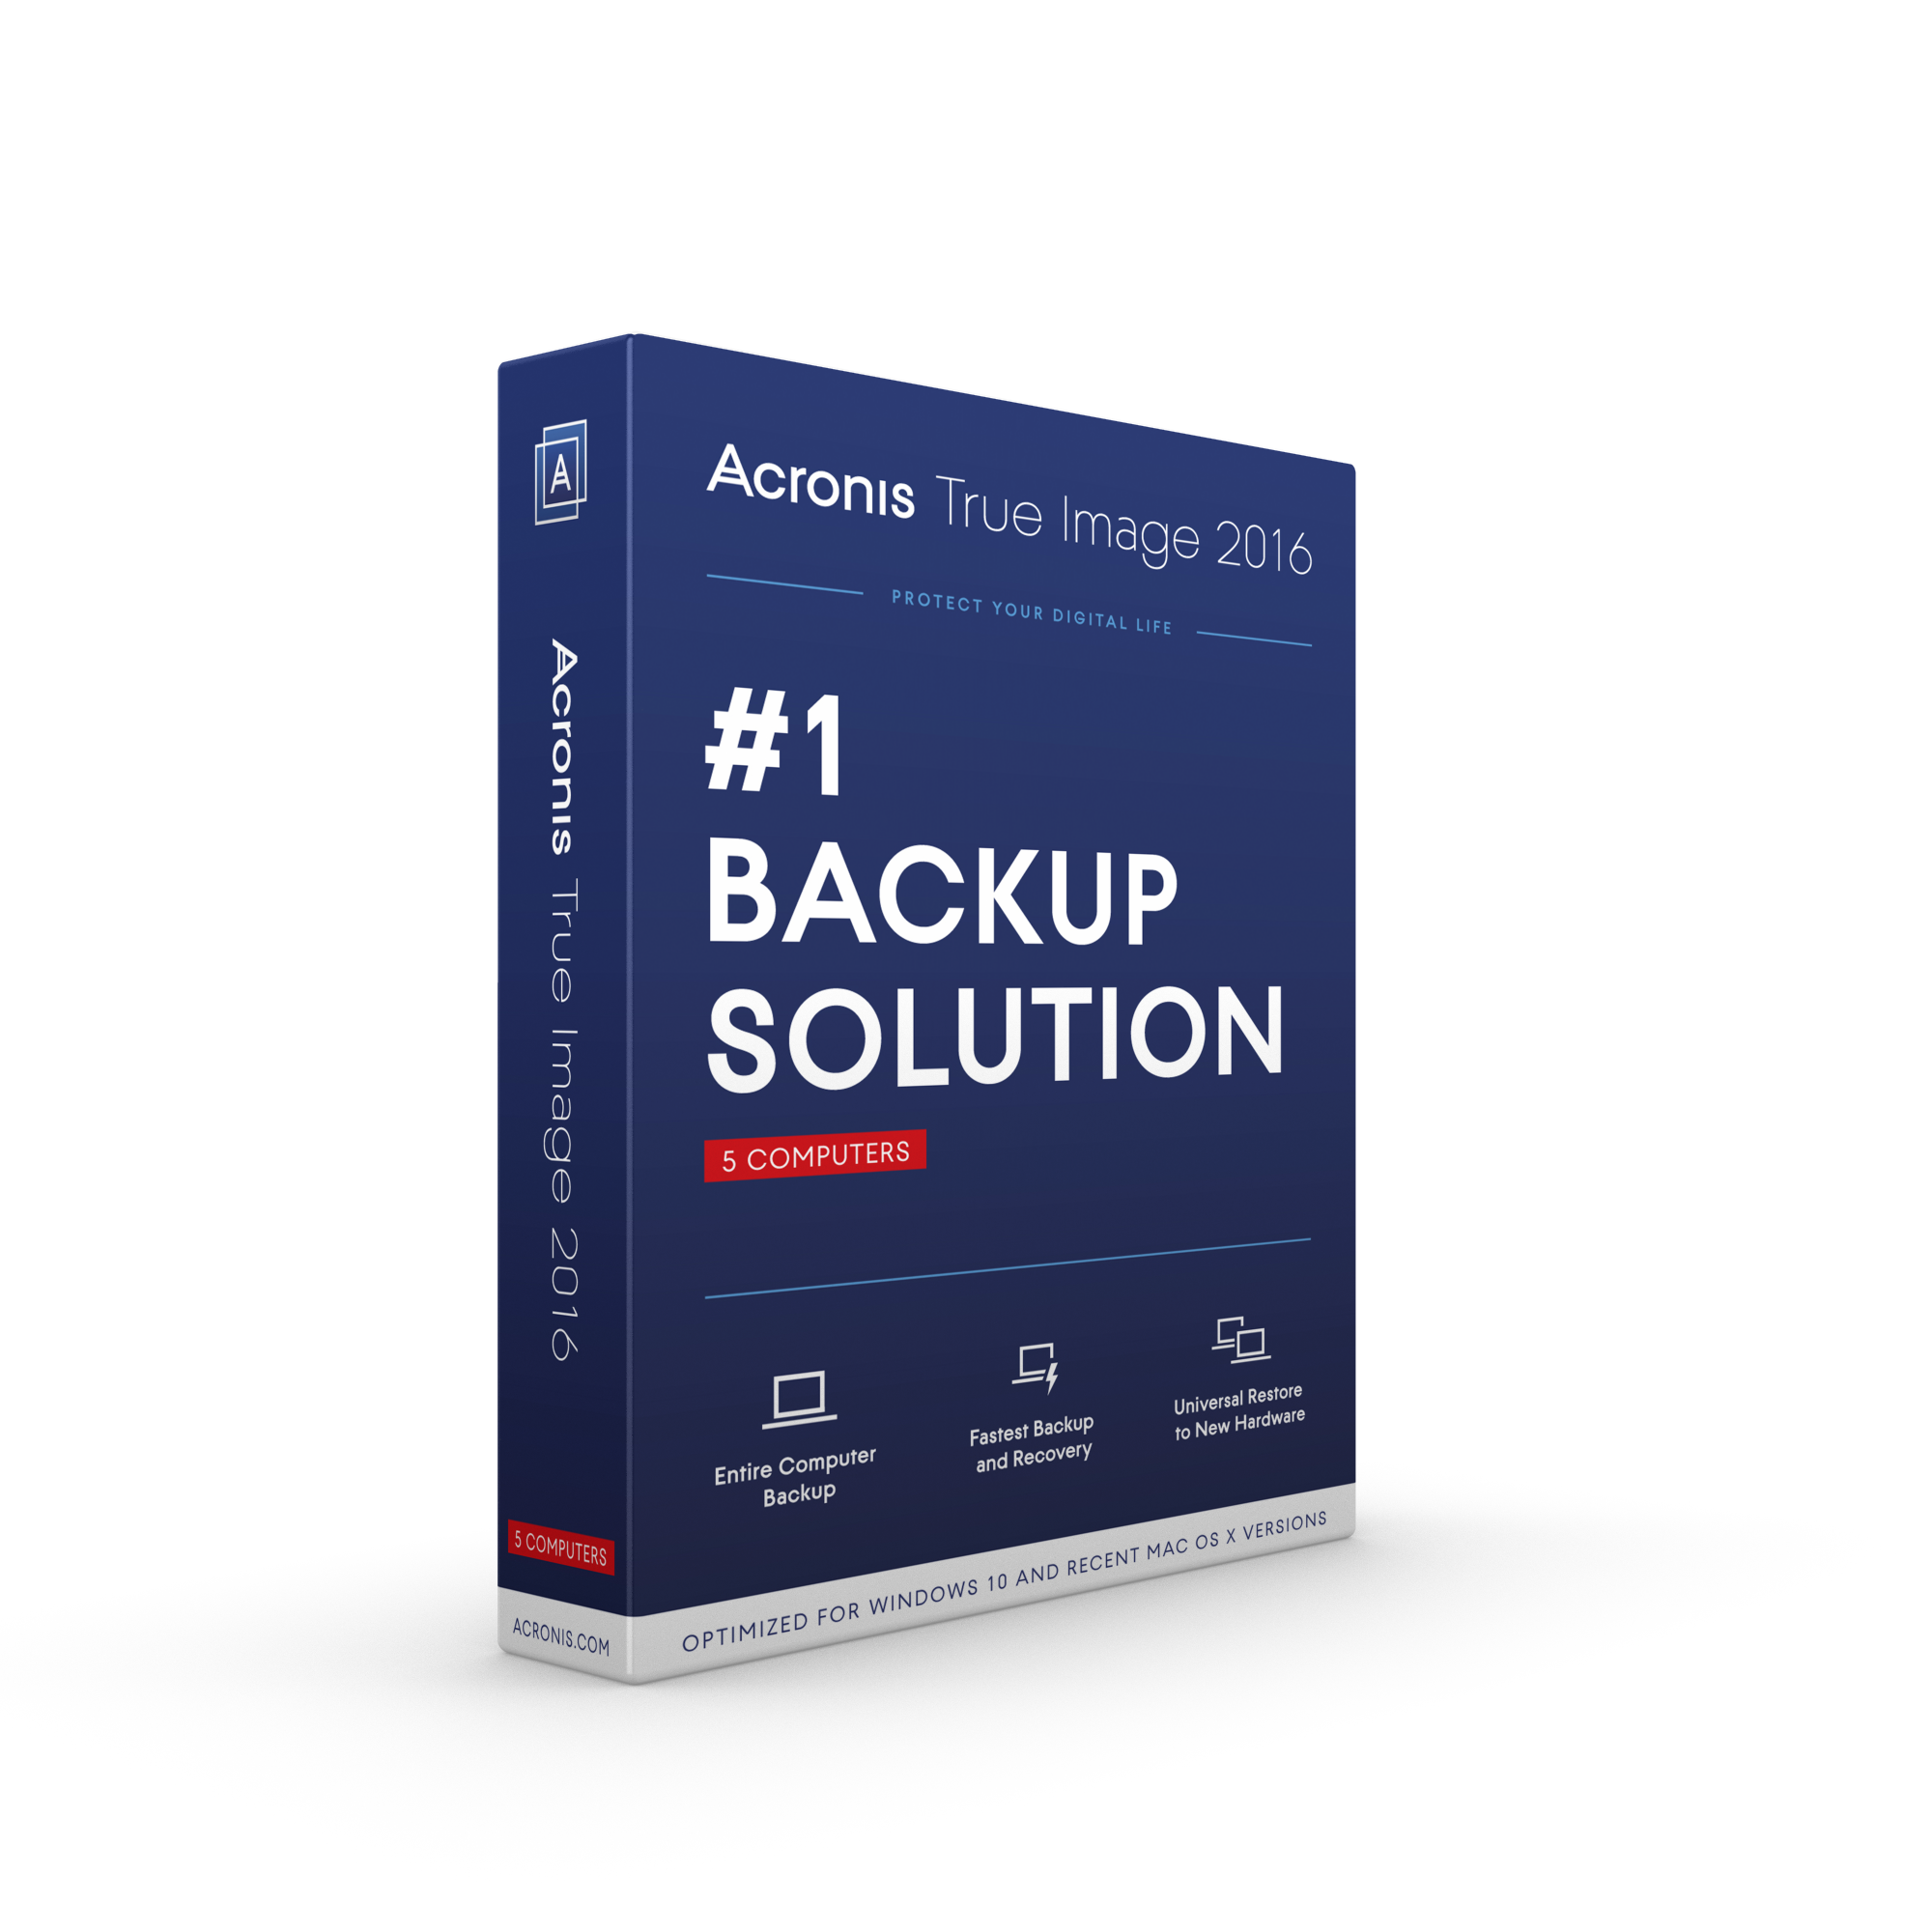 Acronis overview page